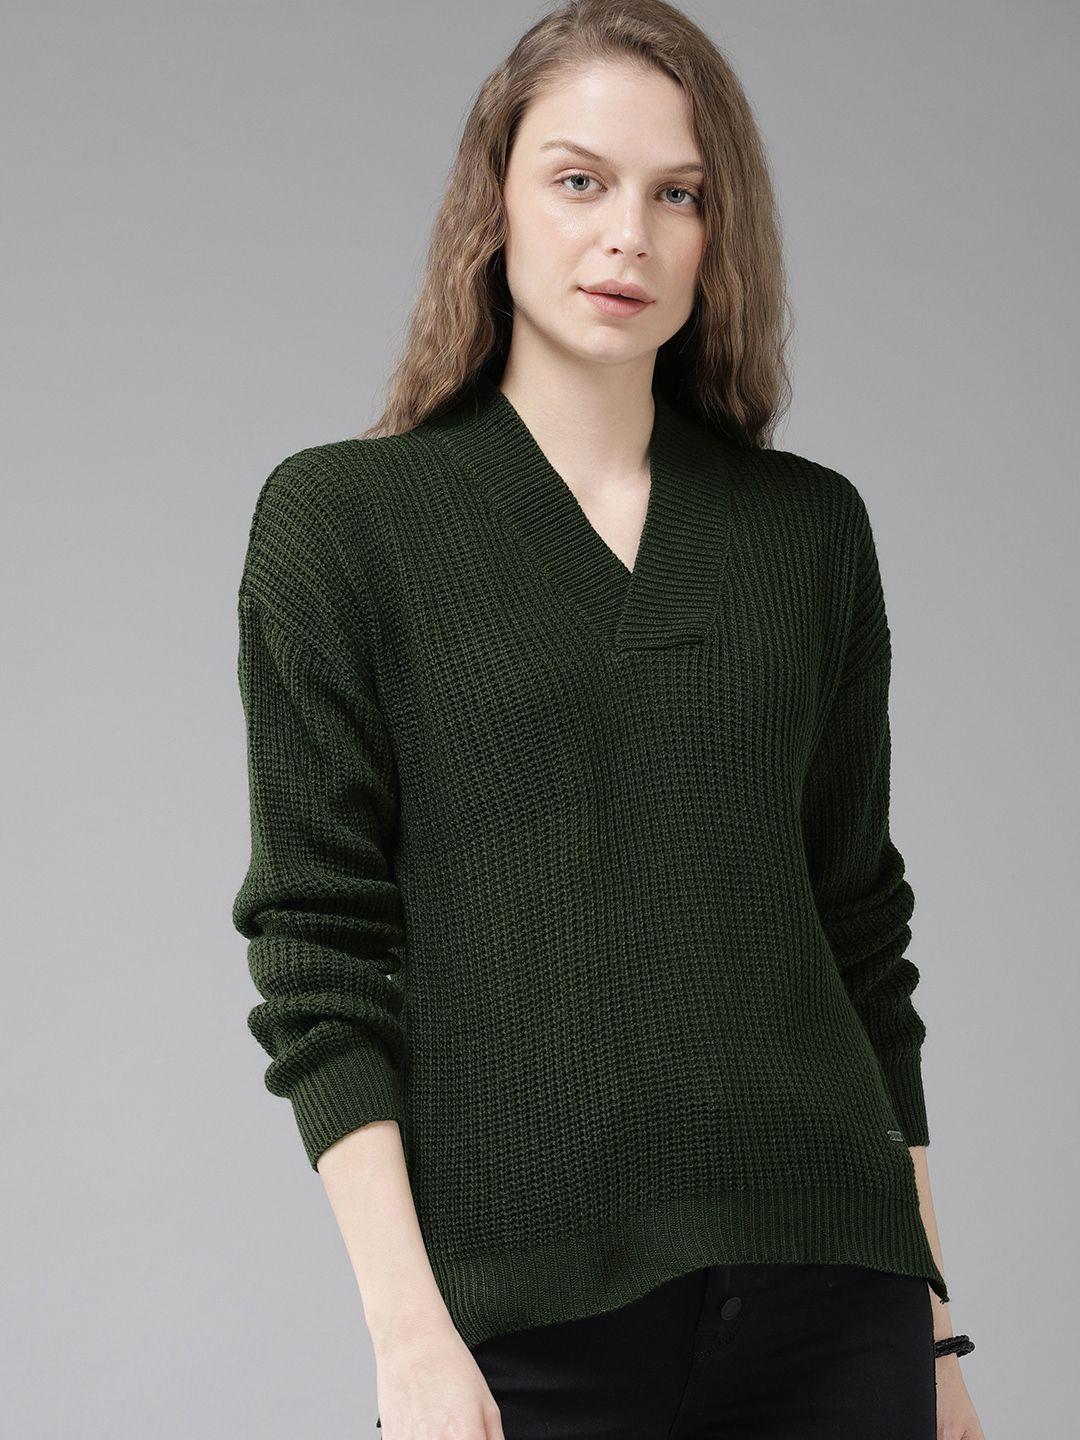 the roadster lifestyle co women green solid sweater